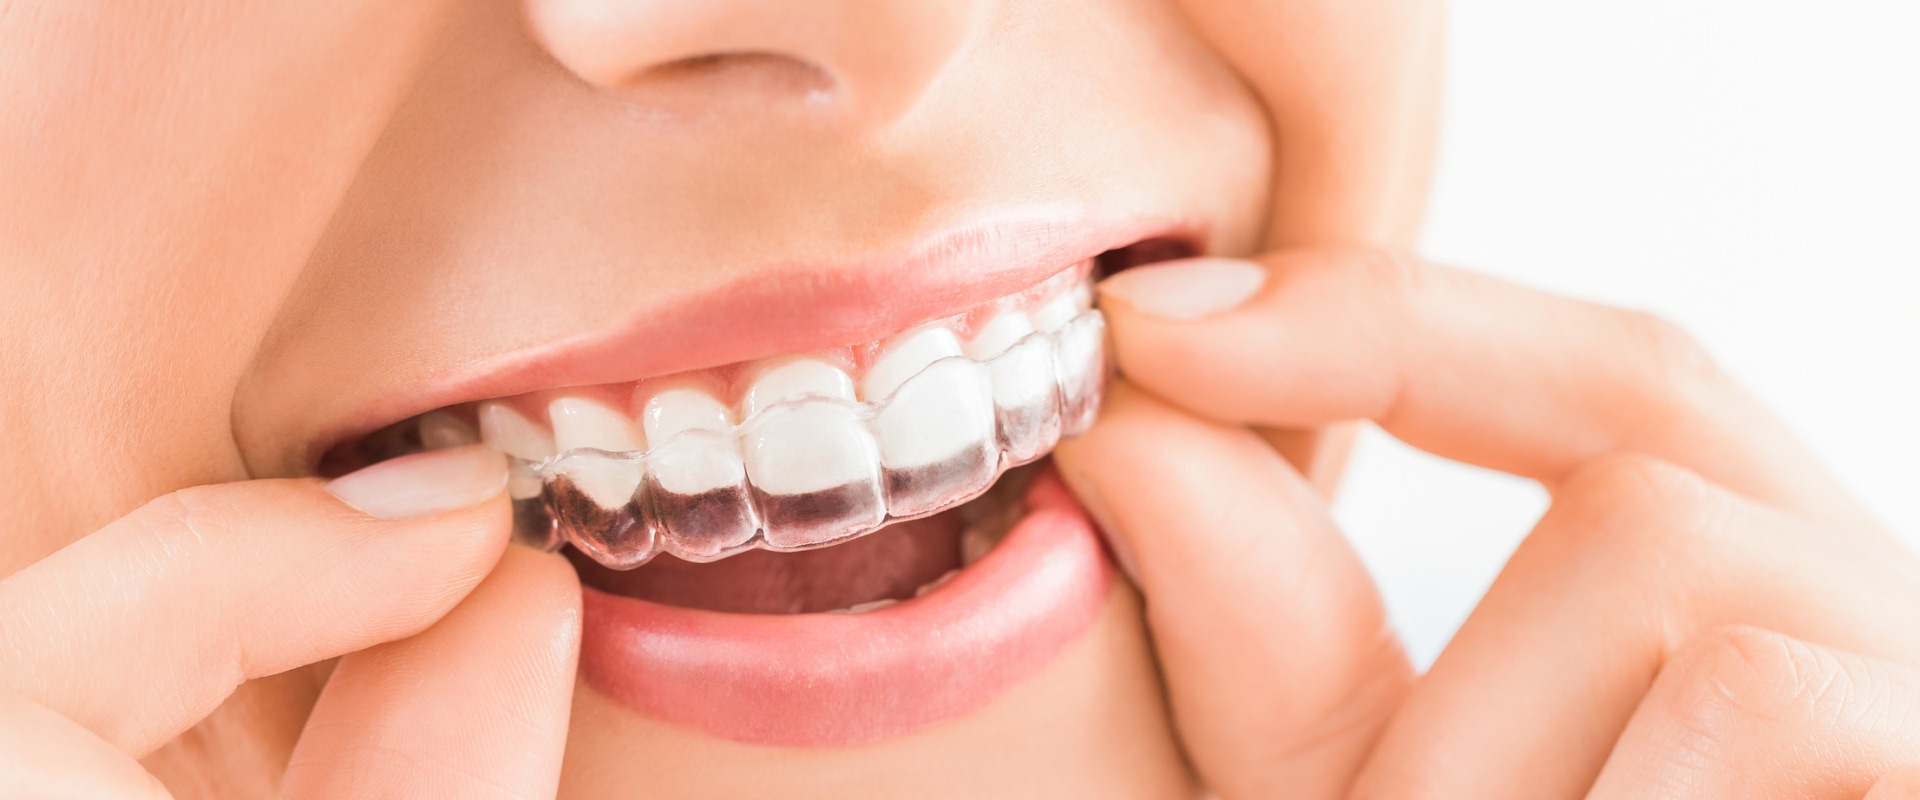 How is invisalign done?